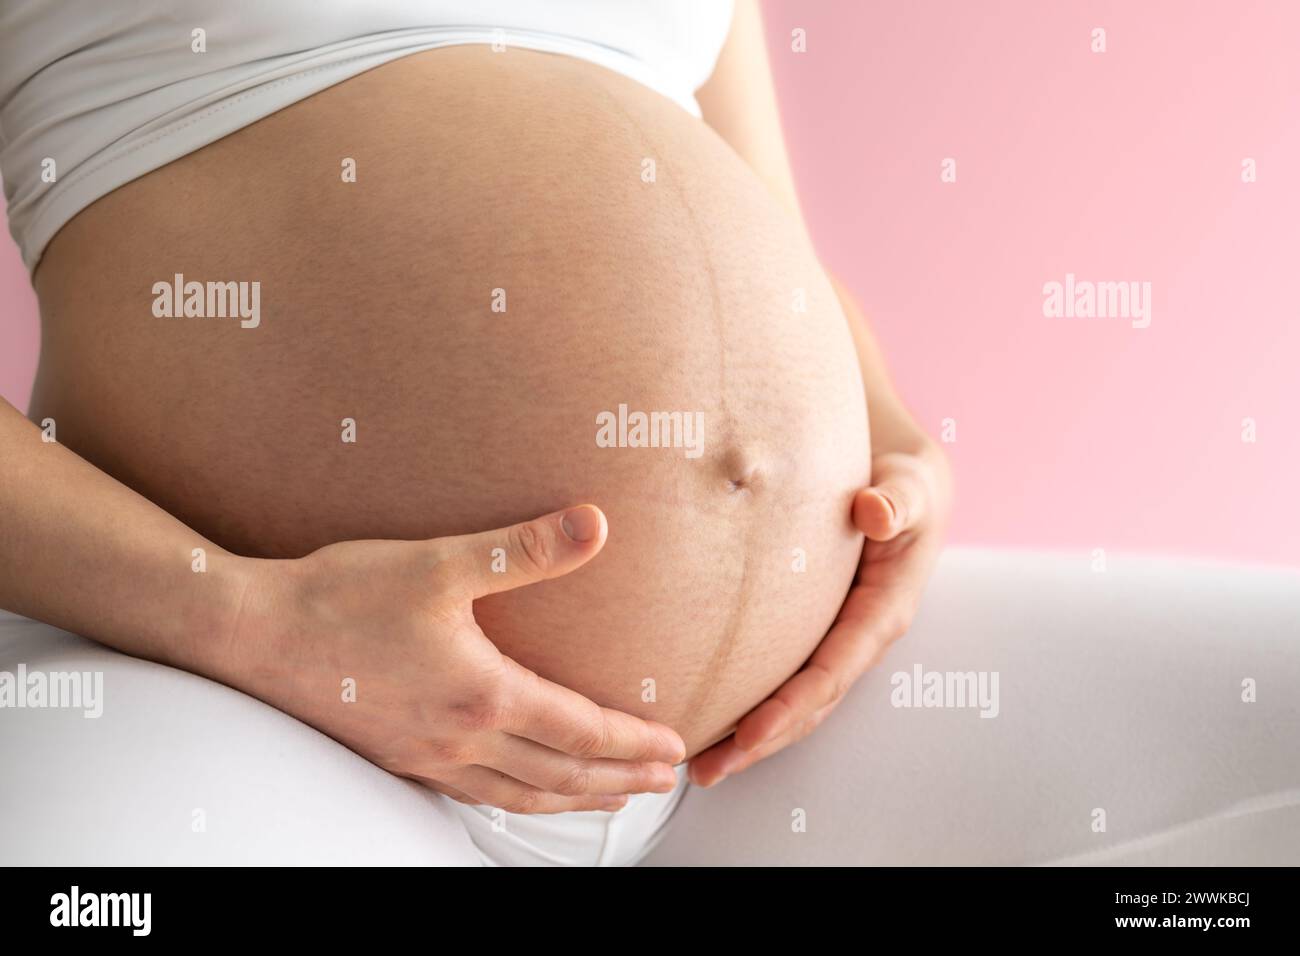 Description: Midsection of a mother and gently holding her very round pregnant baby bump. Side view. Pink background. Bright shot. Stock Photo